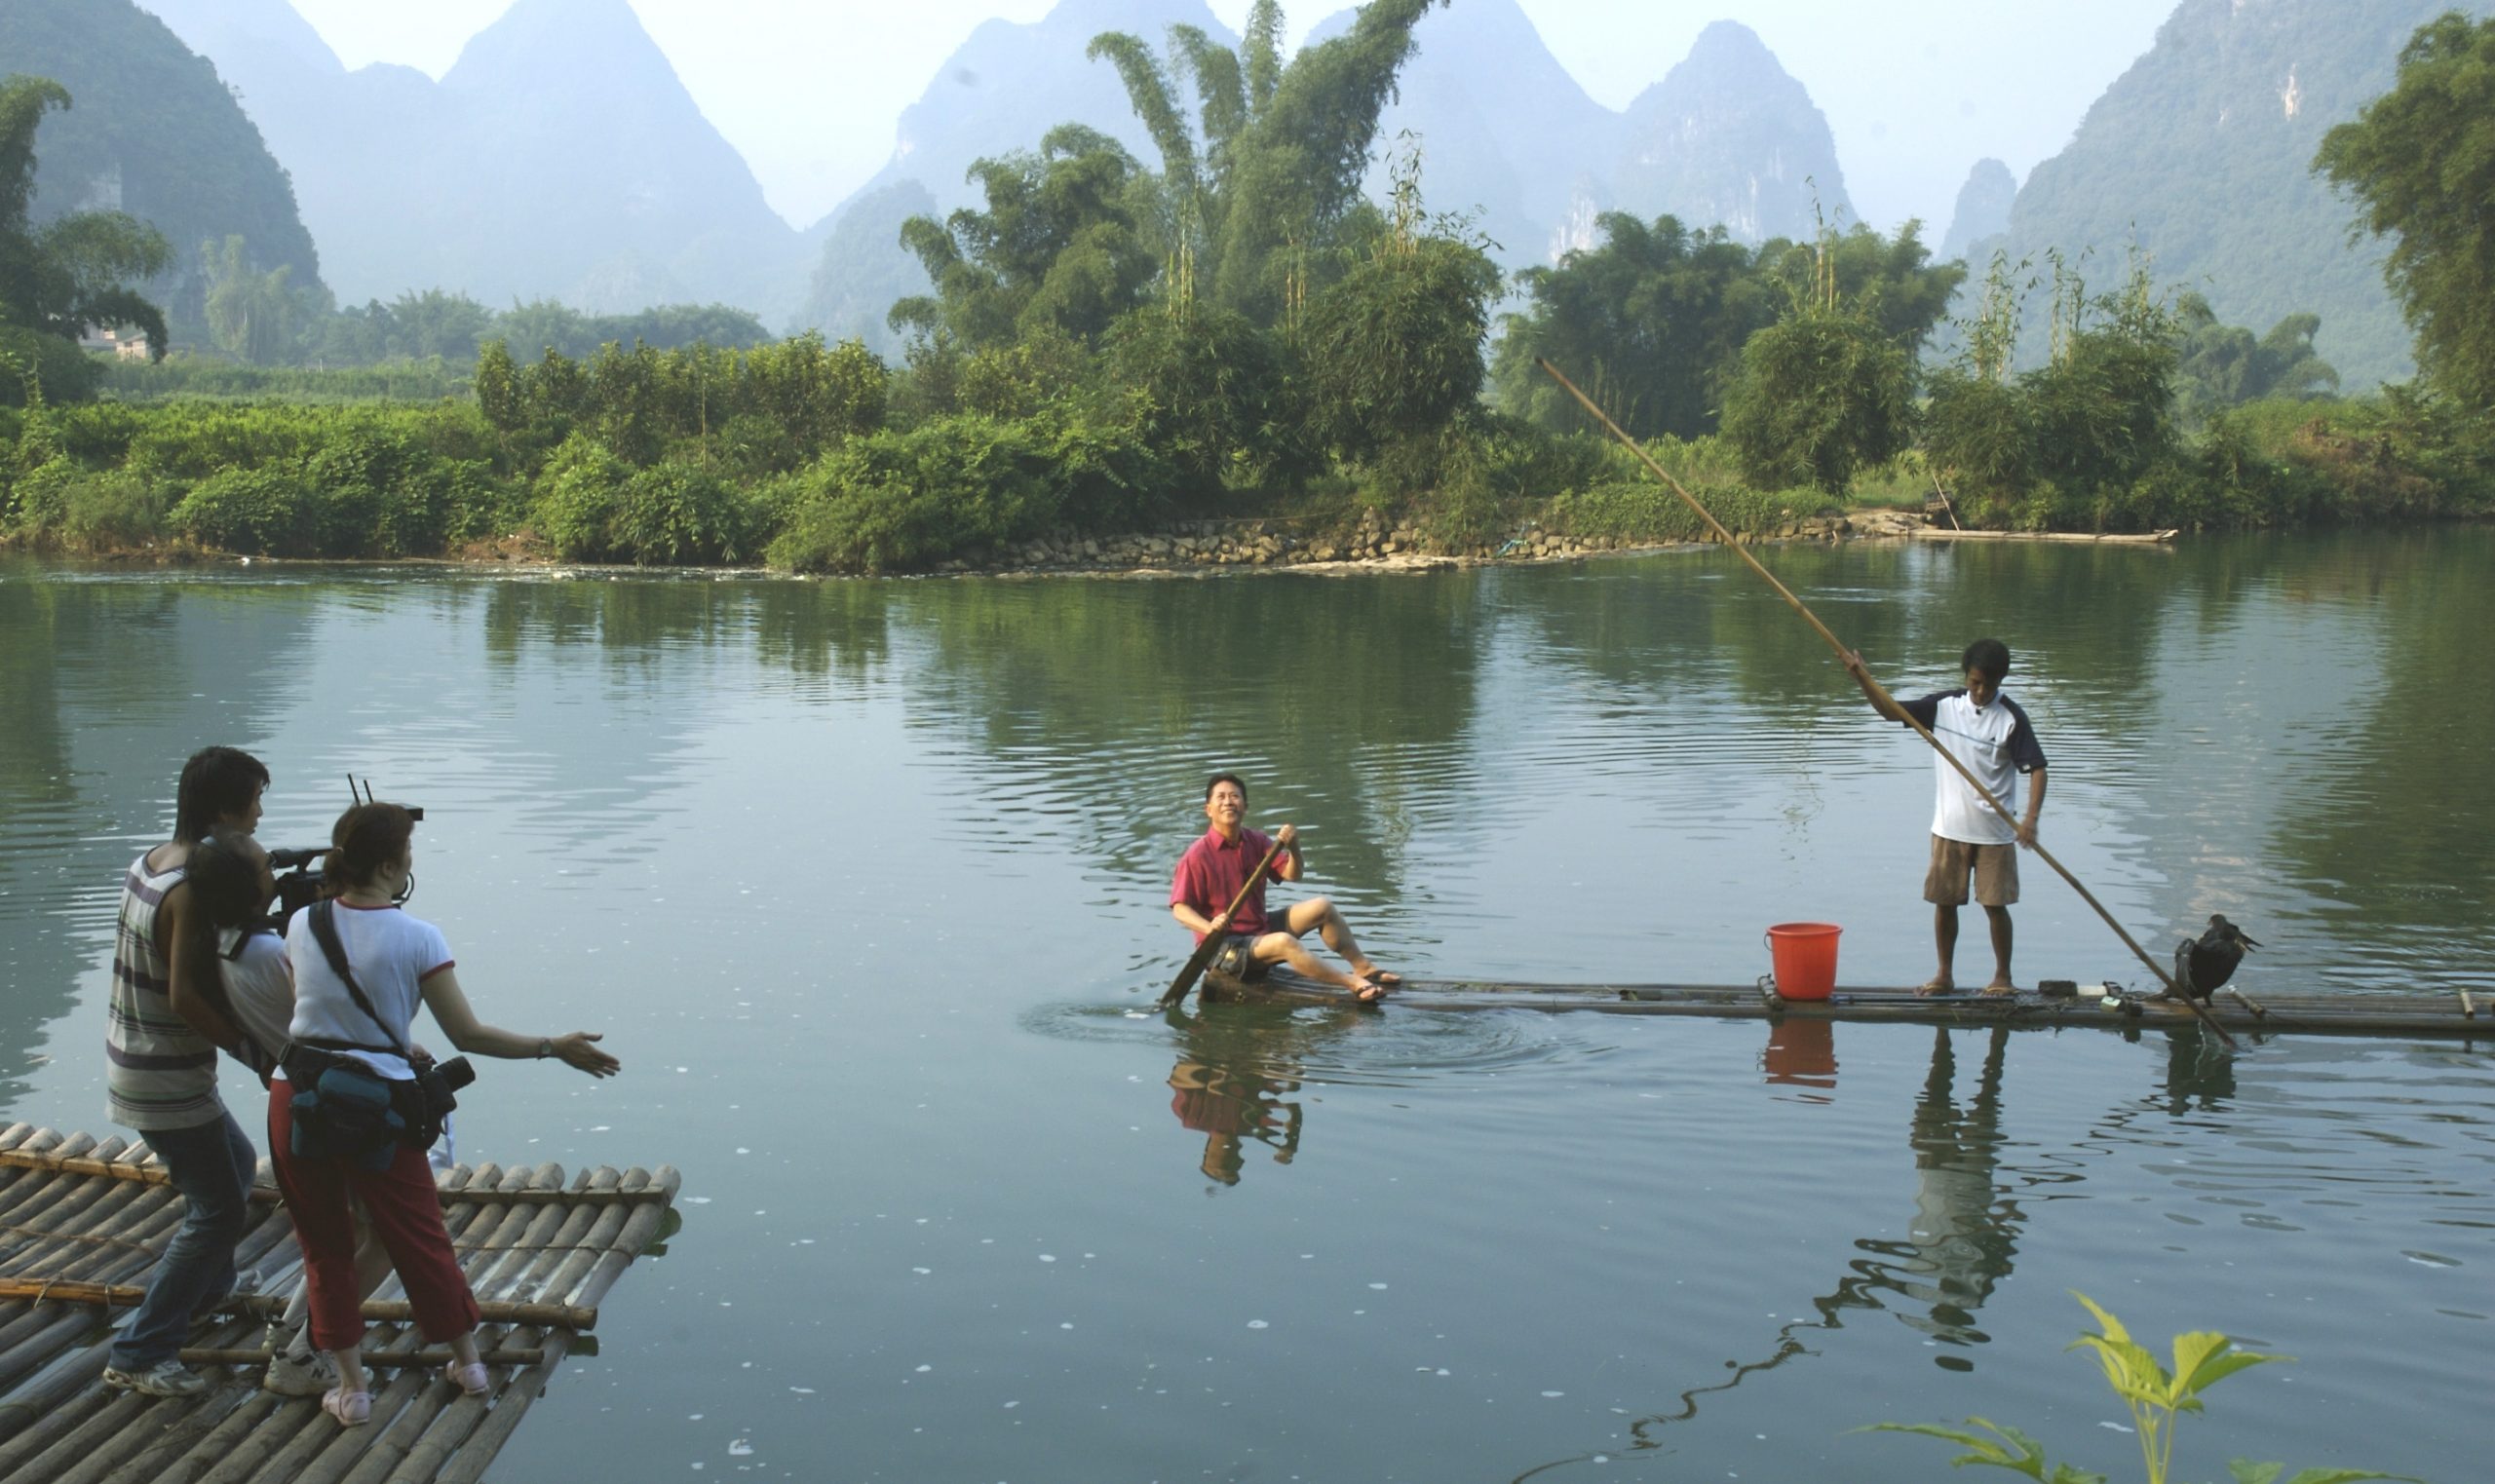 Martin Yan on a river in Yangshuo, China, with misty mountains in the background